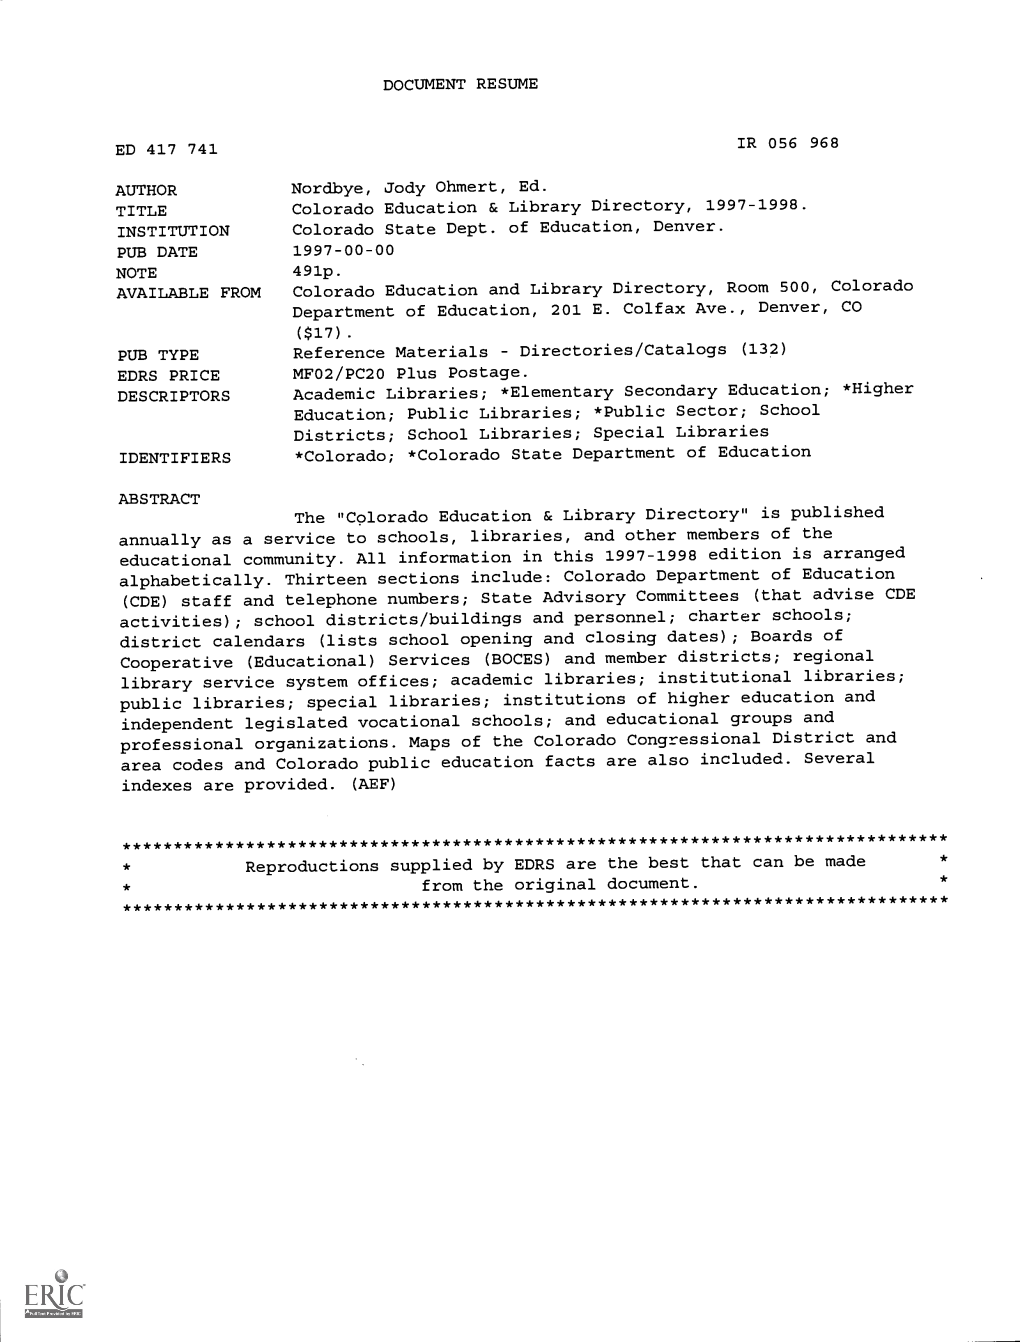 AUTHOR AVAILABLE from DOCUMENT RESUME Colorado Education & Library Directory, 1997-1998. Colorado State Dept. of Education